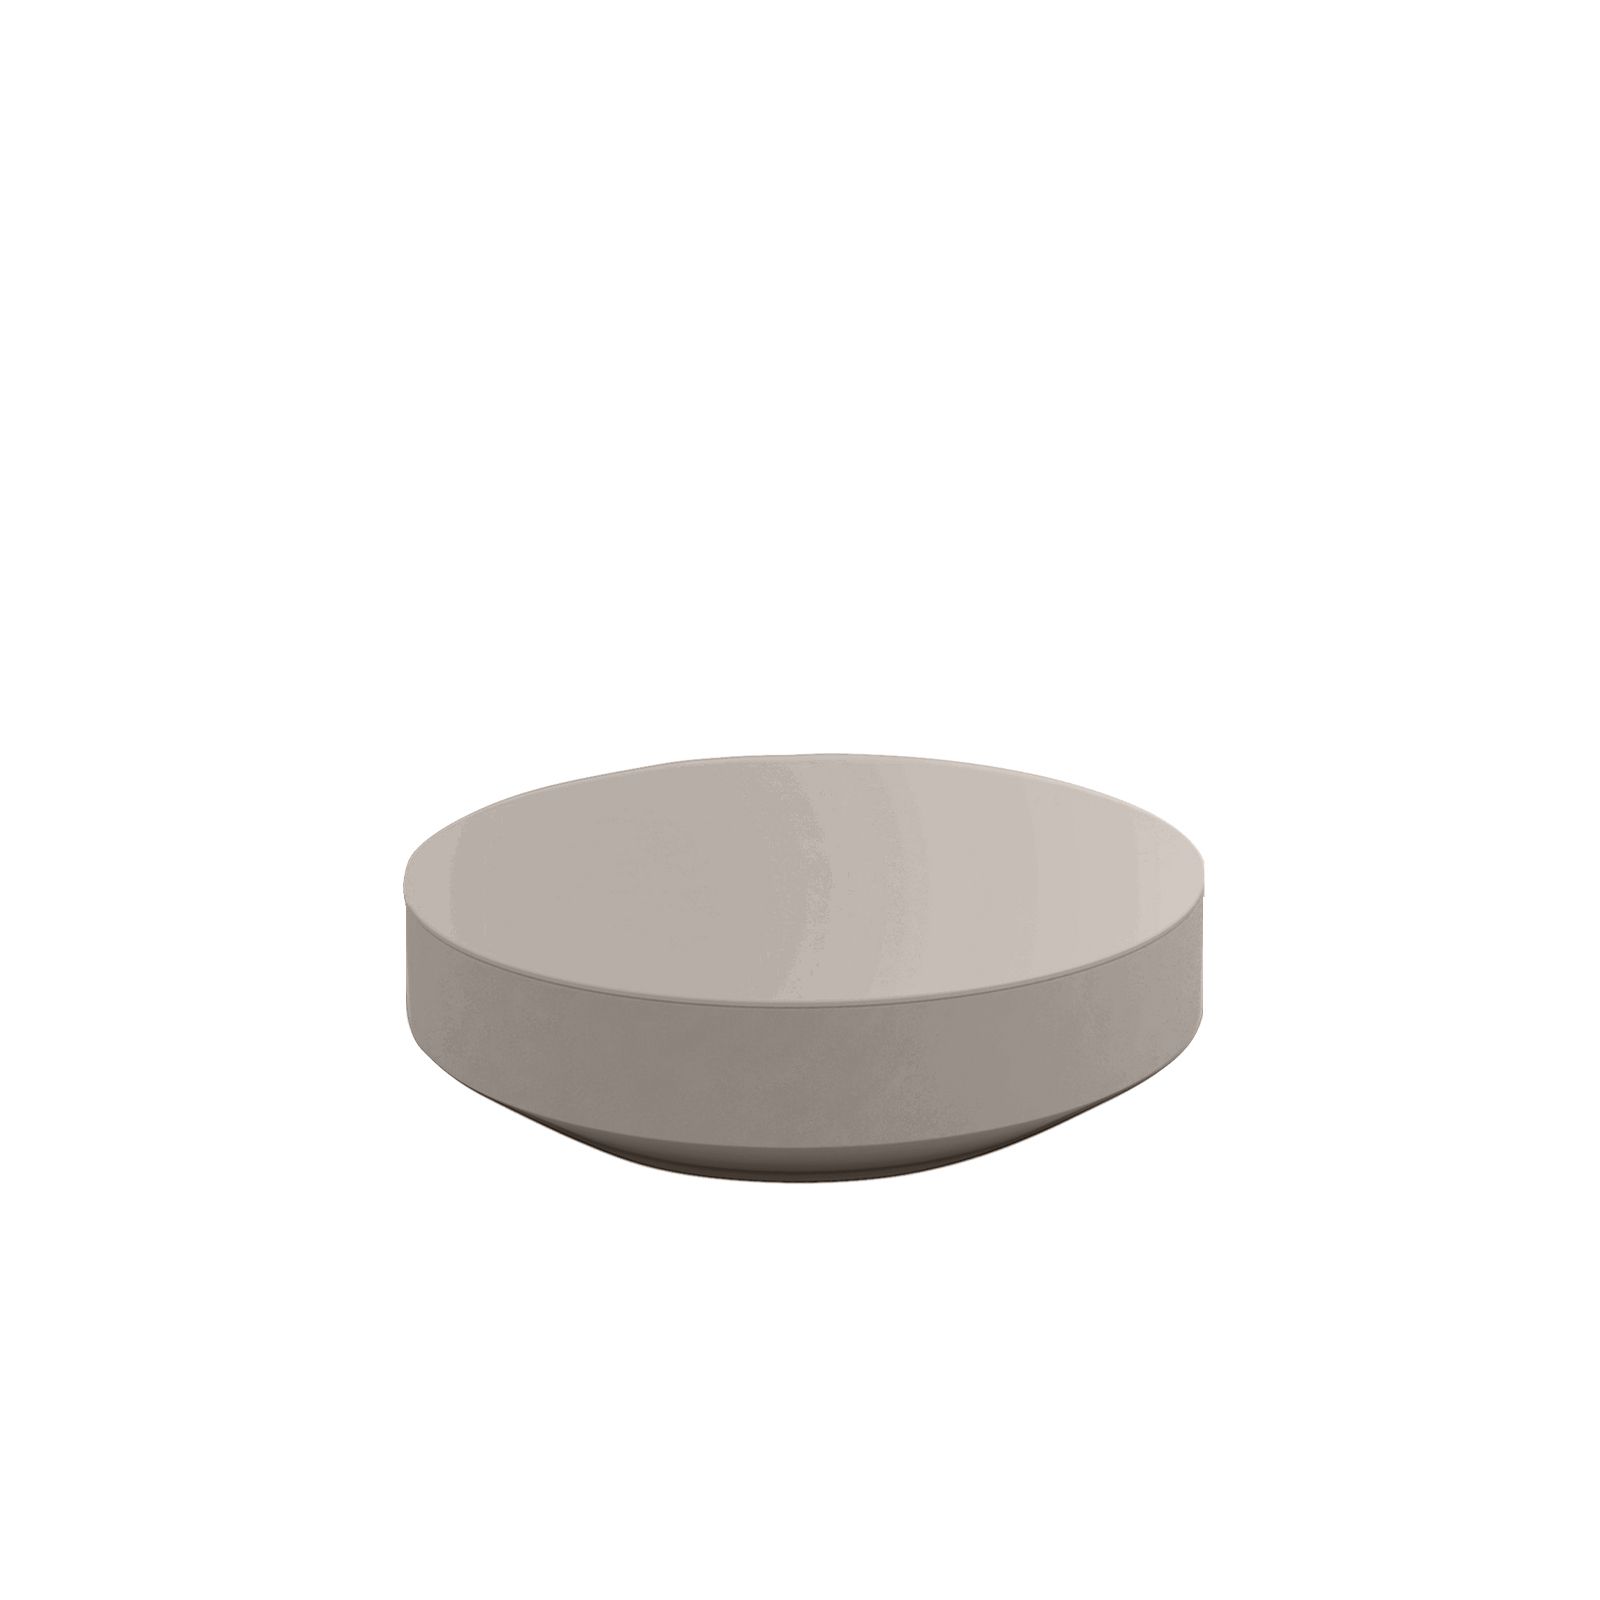 VELA OCCASIONAL TABLE